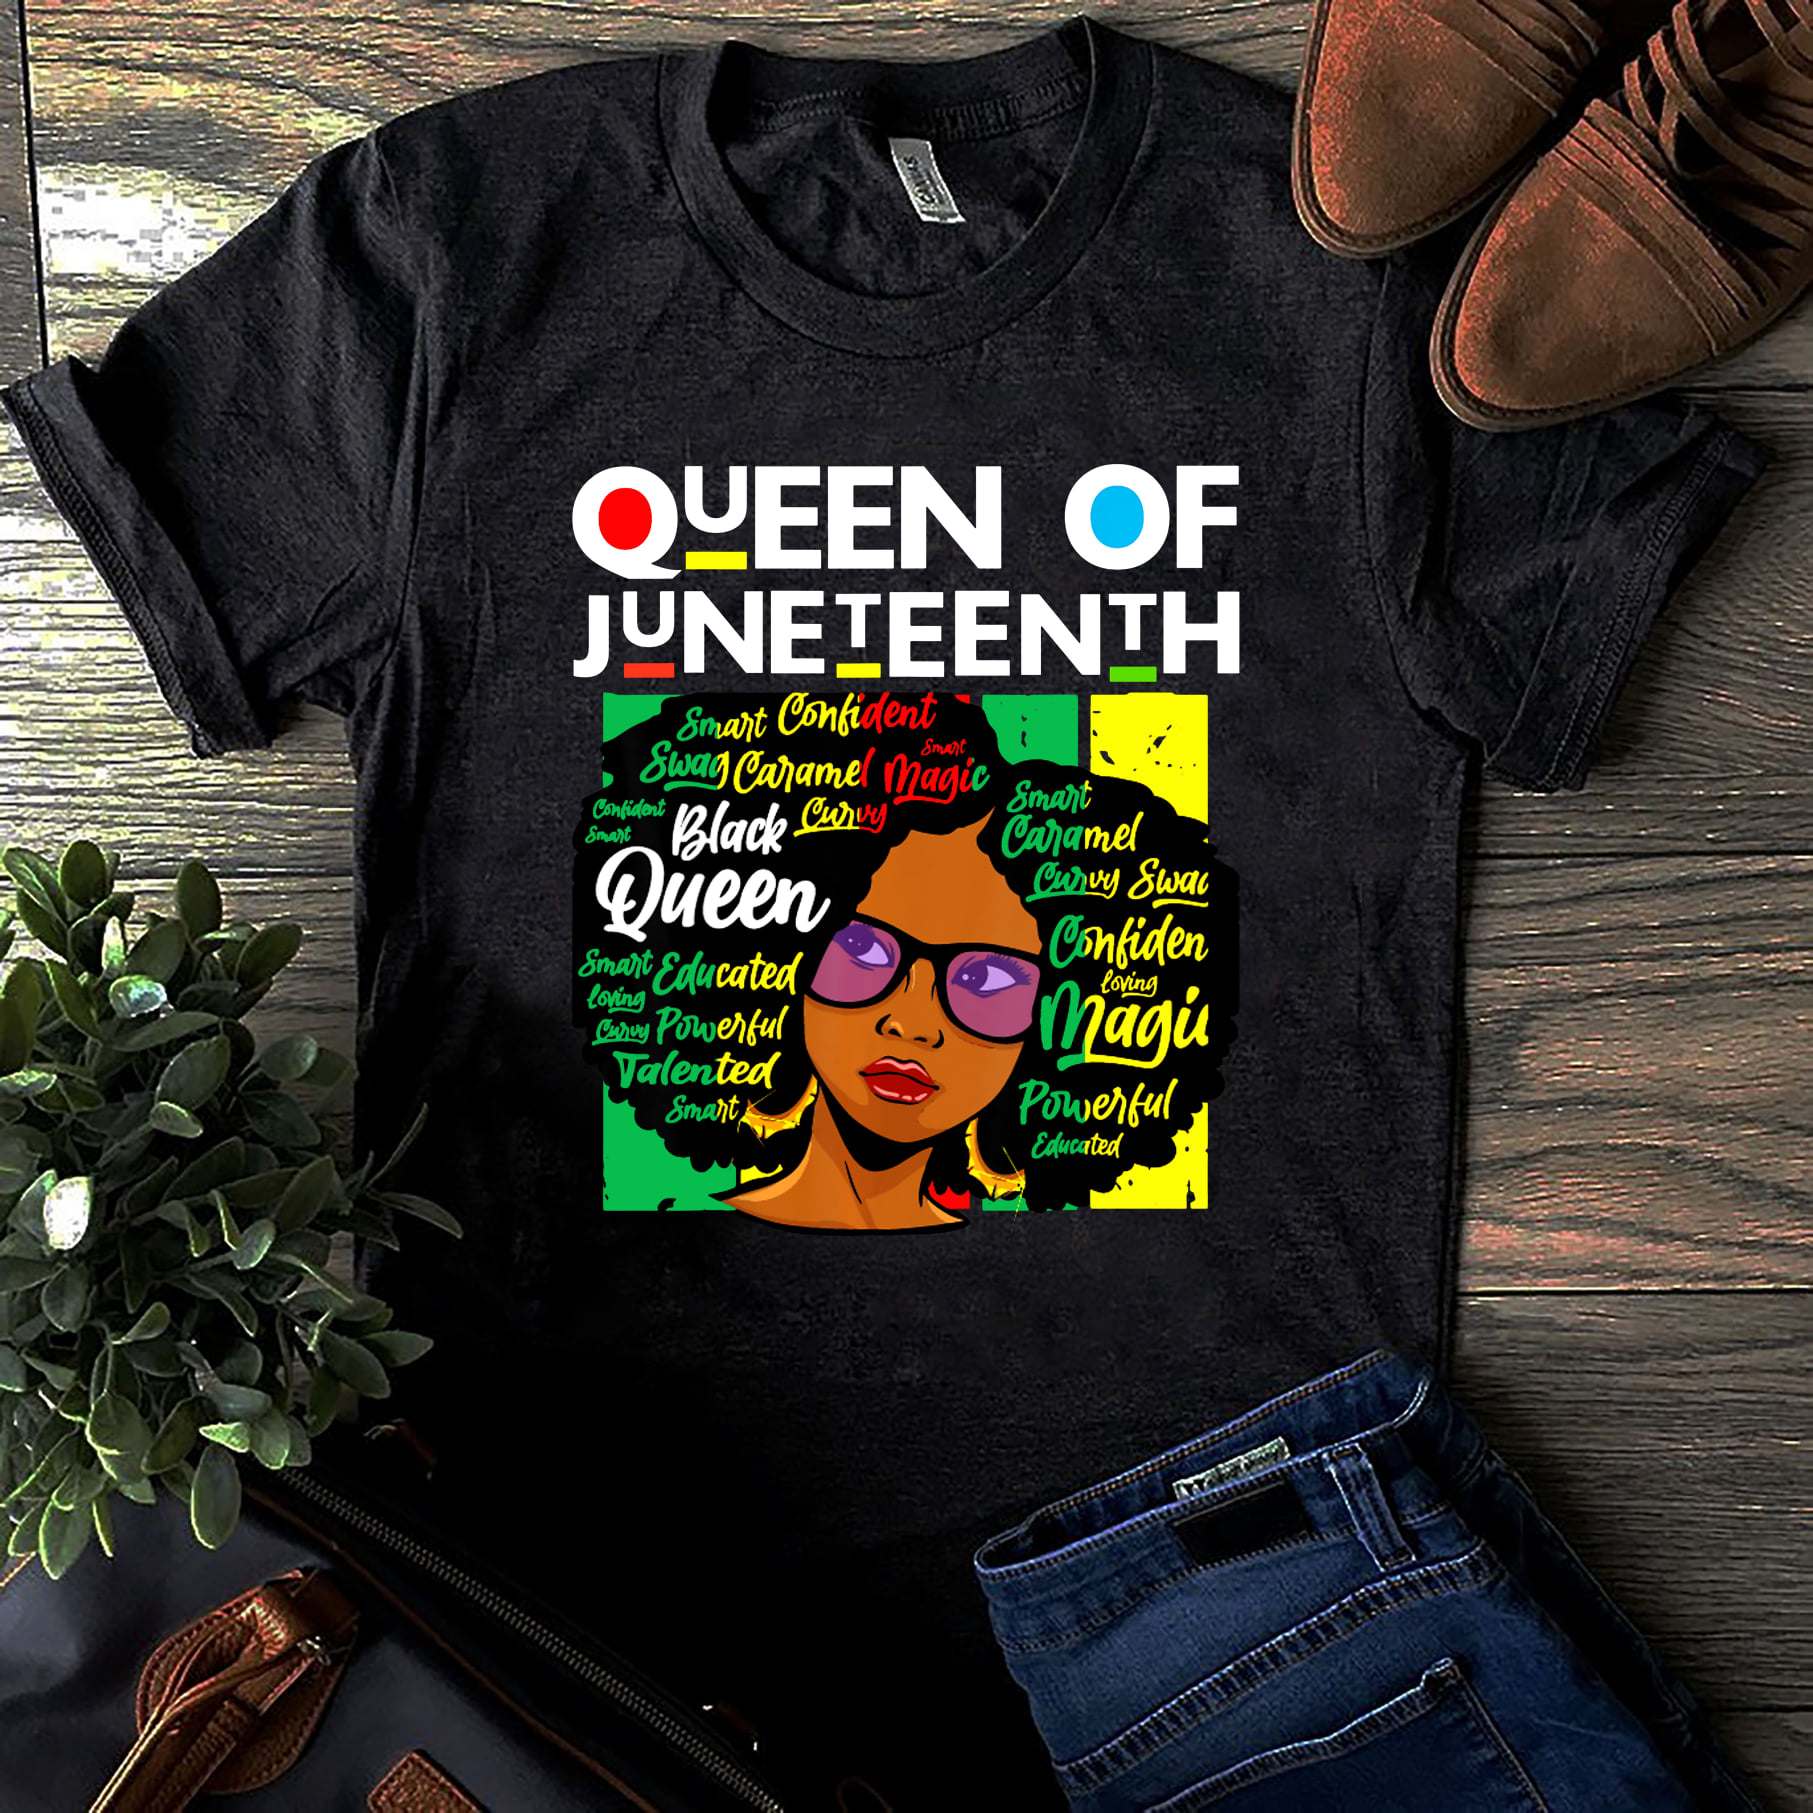 Queen of Juneteenth - Black community, freedom day